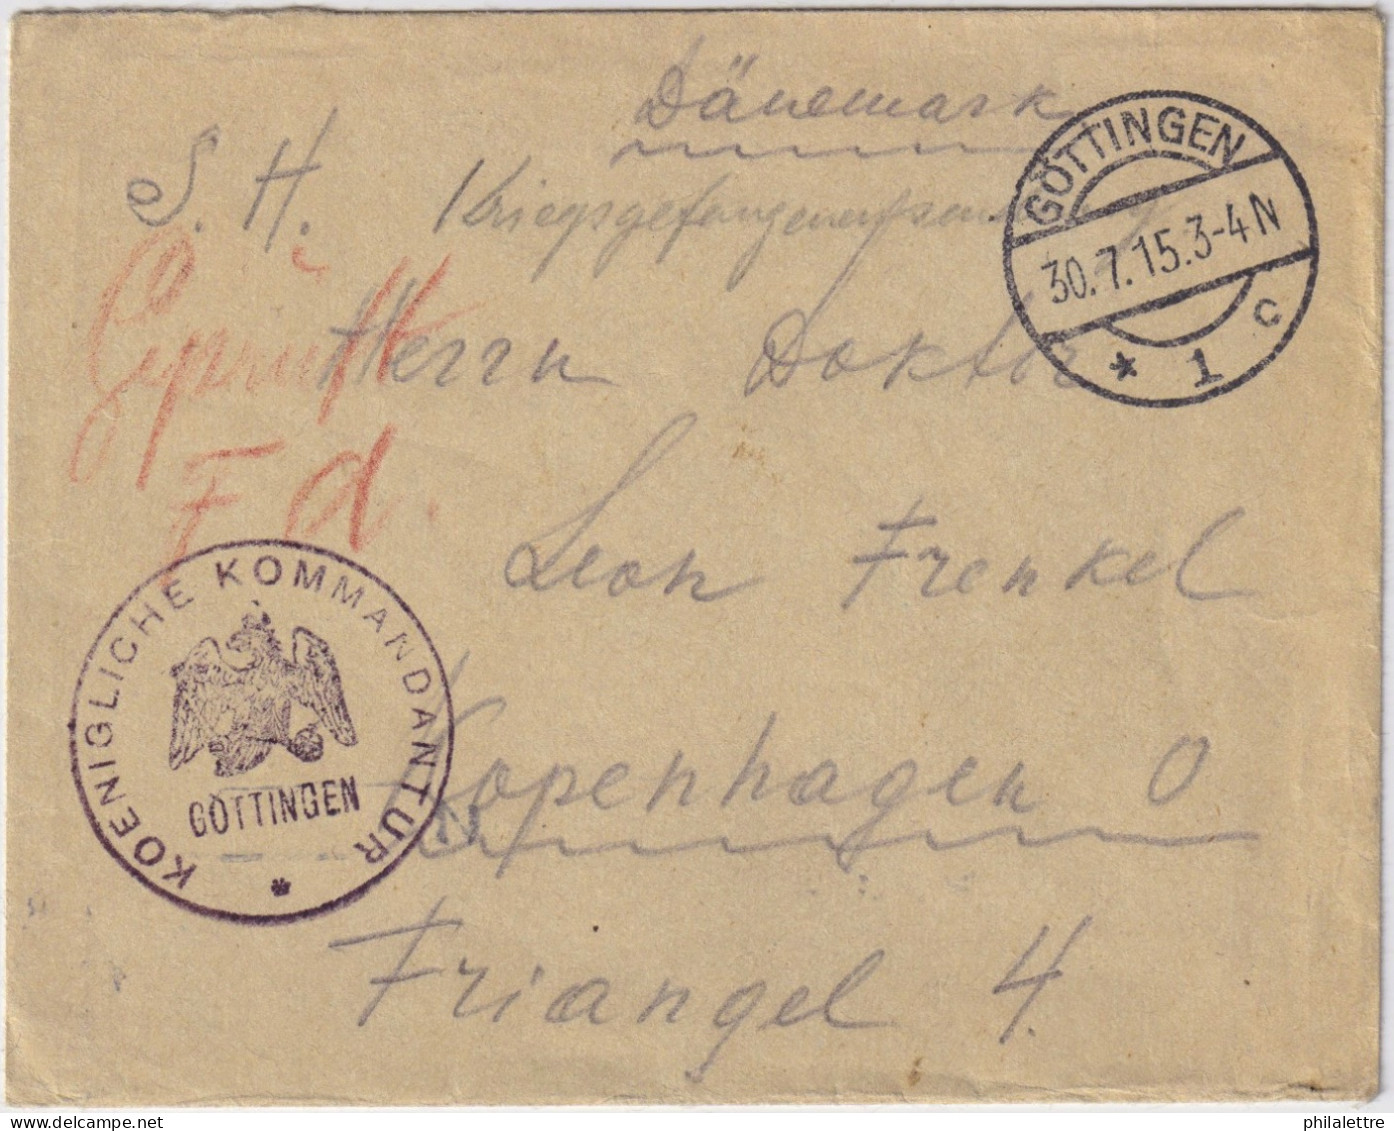 ALLEMAGNE / GERMANY - 1915 POW Cover From An NC Officer In GÖTTINGEN GFLager Addressed To COPENHAGEN, Denmark - Lettres & Documents